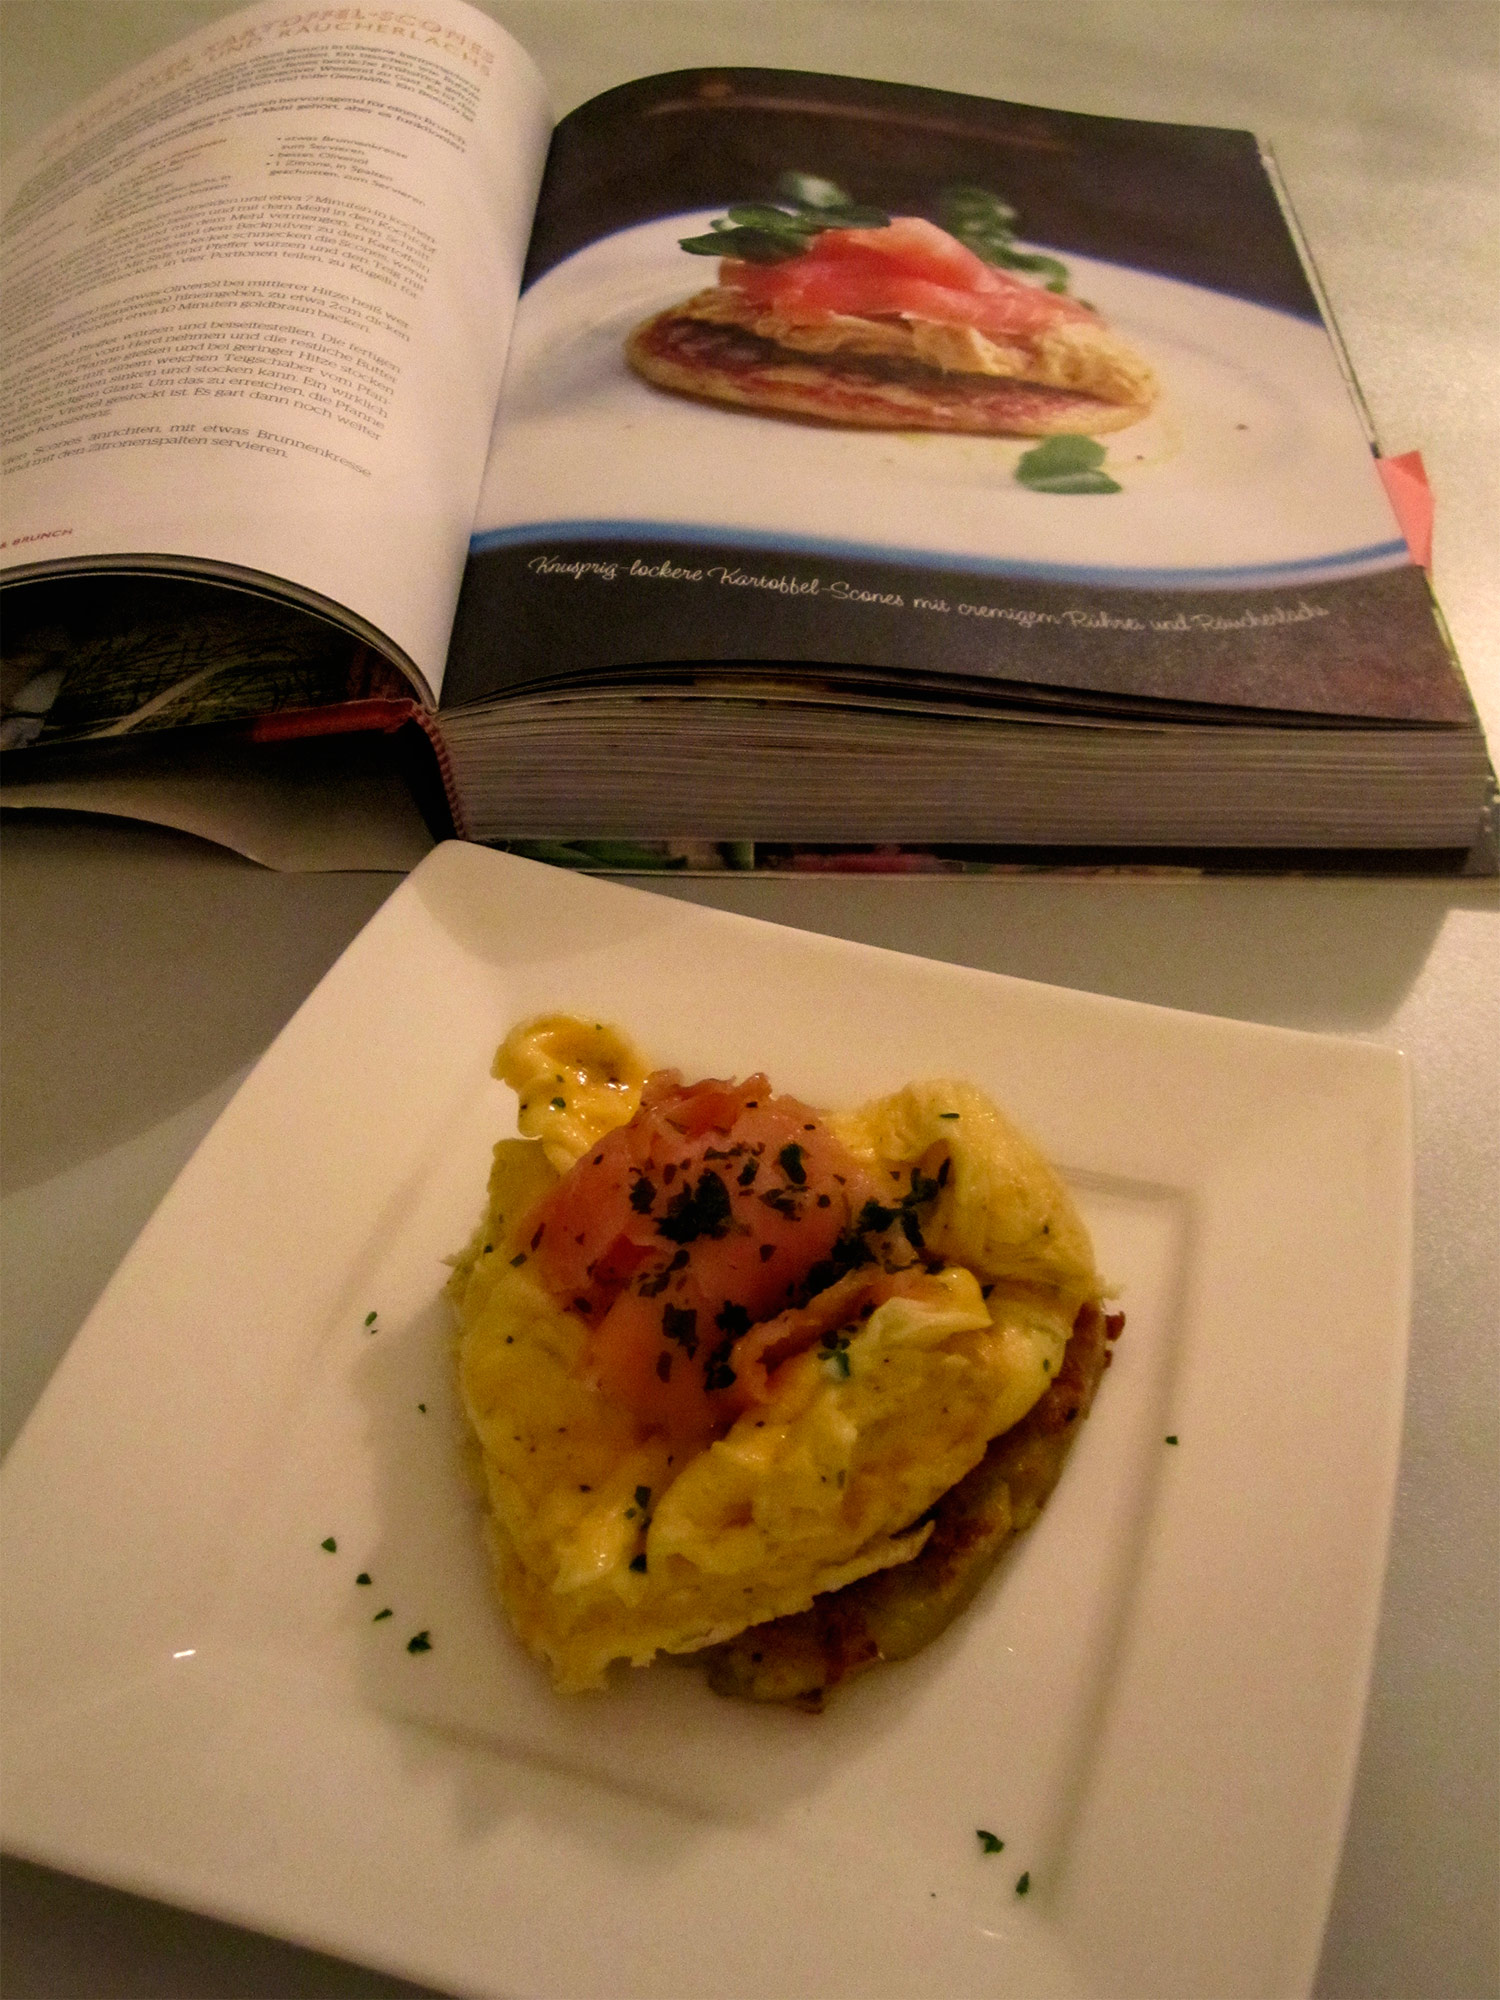 Sunday Brunch: Glasgow potato scones with scrambled egg and smoked salmon